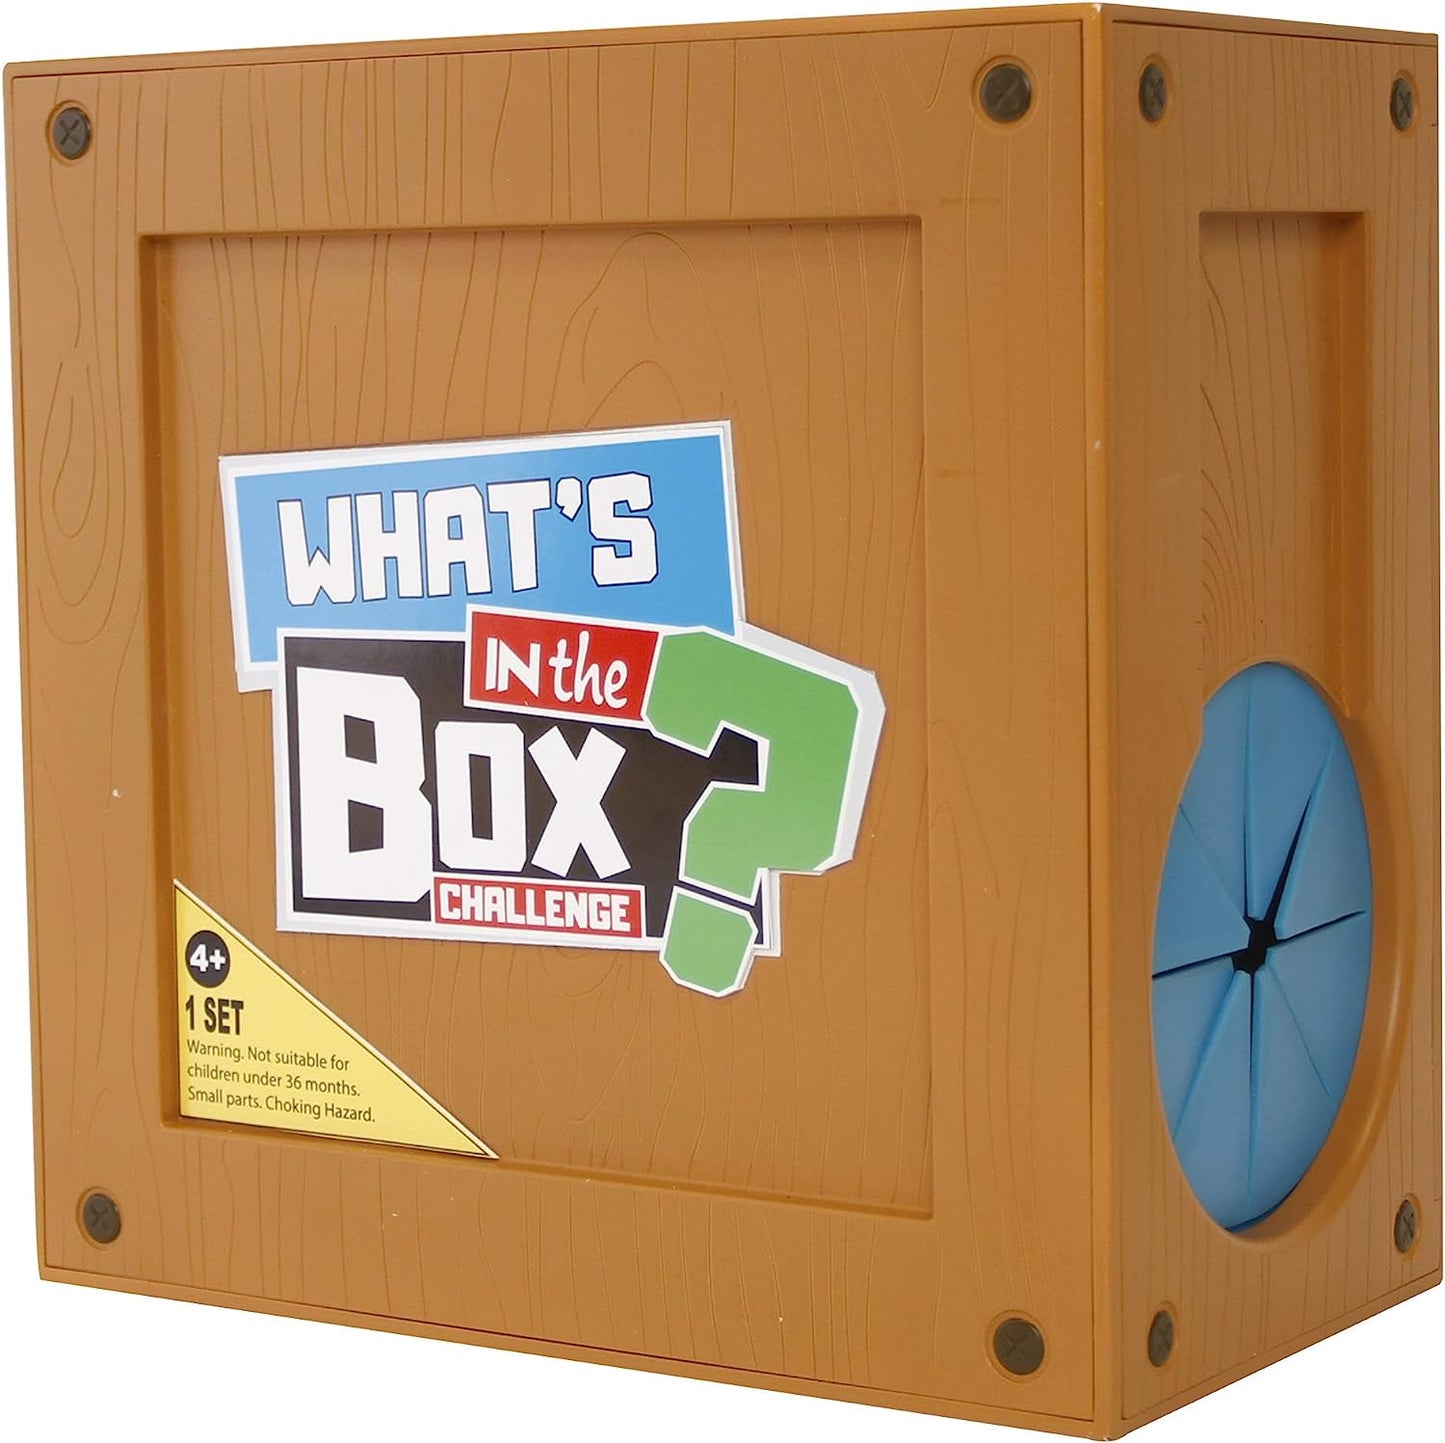 Whats In the Box